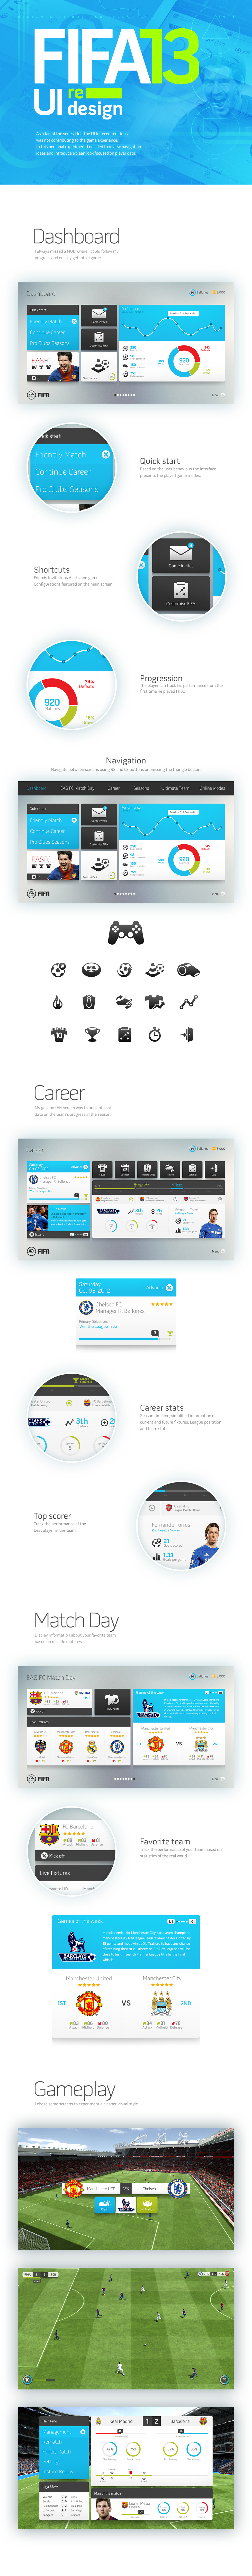 Interface redesign FIFA game video game football soccer ux/ui user interface icons